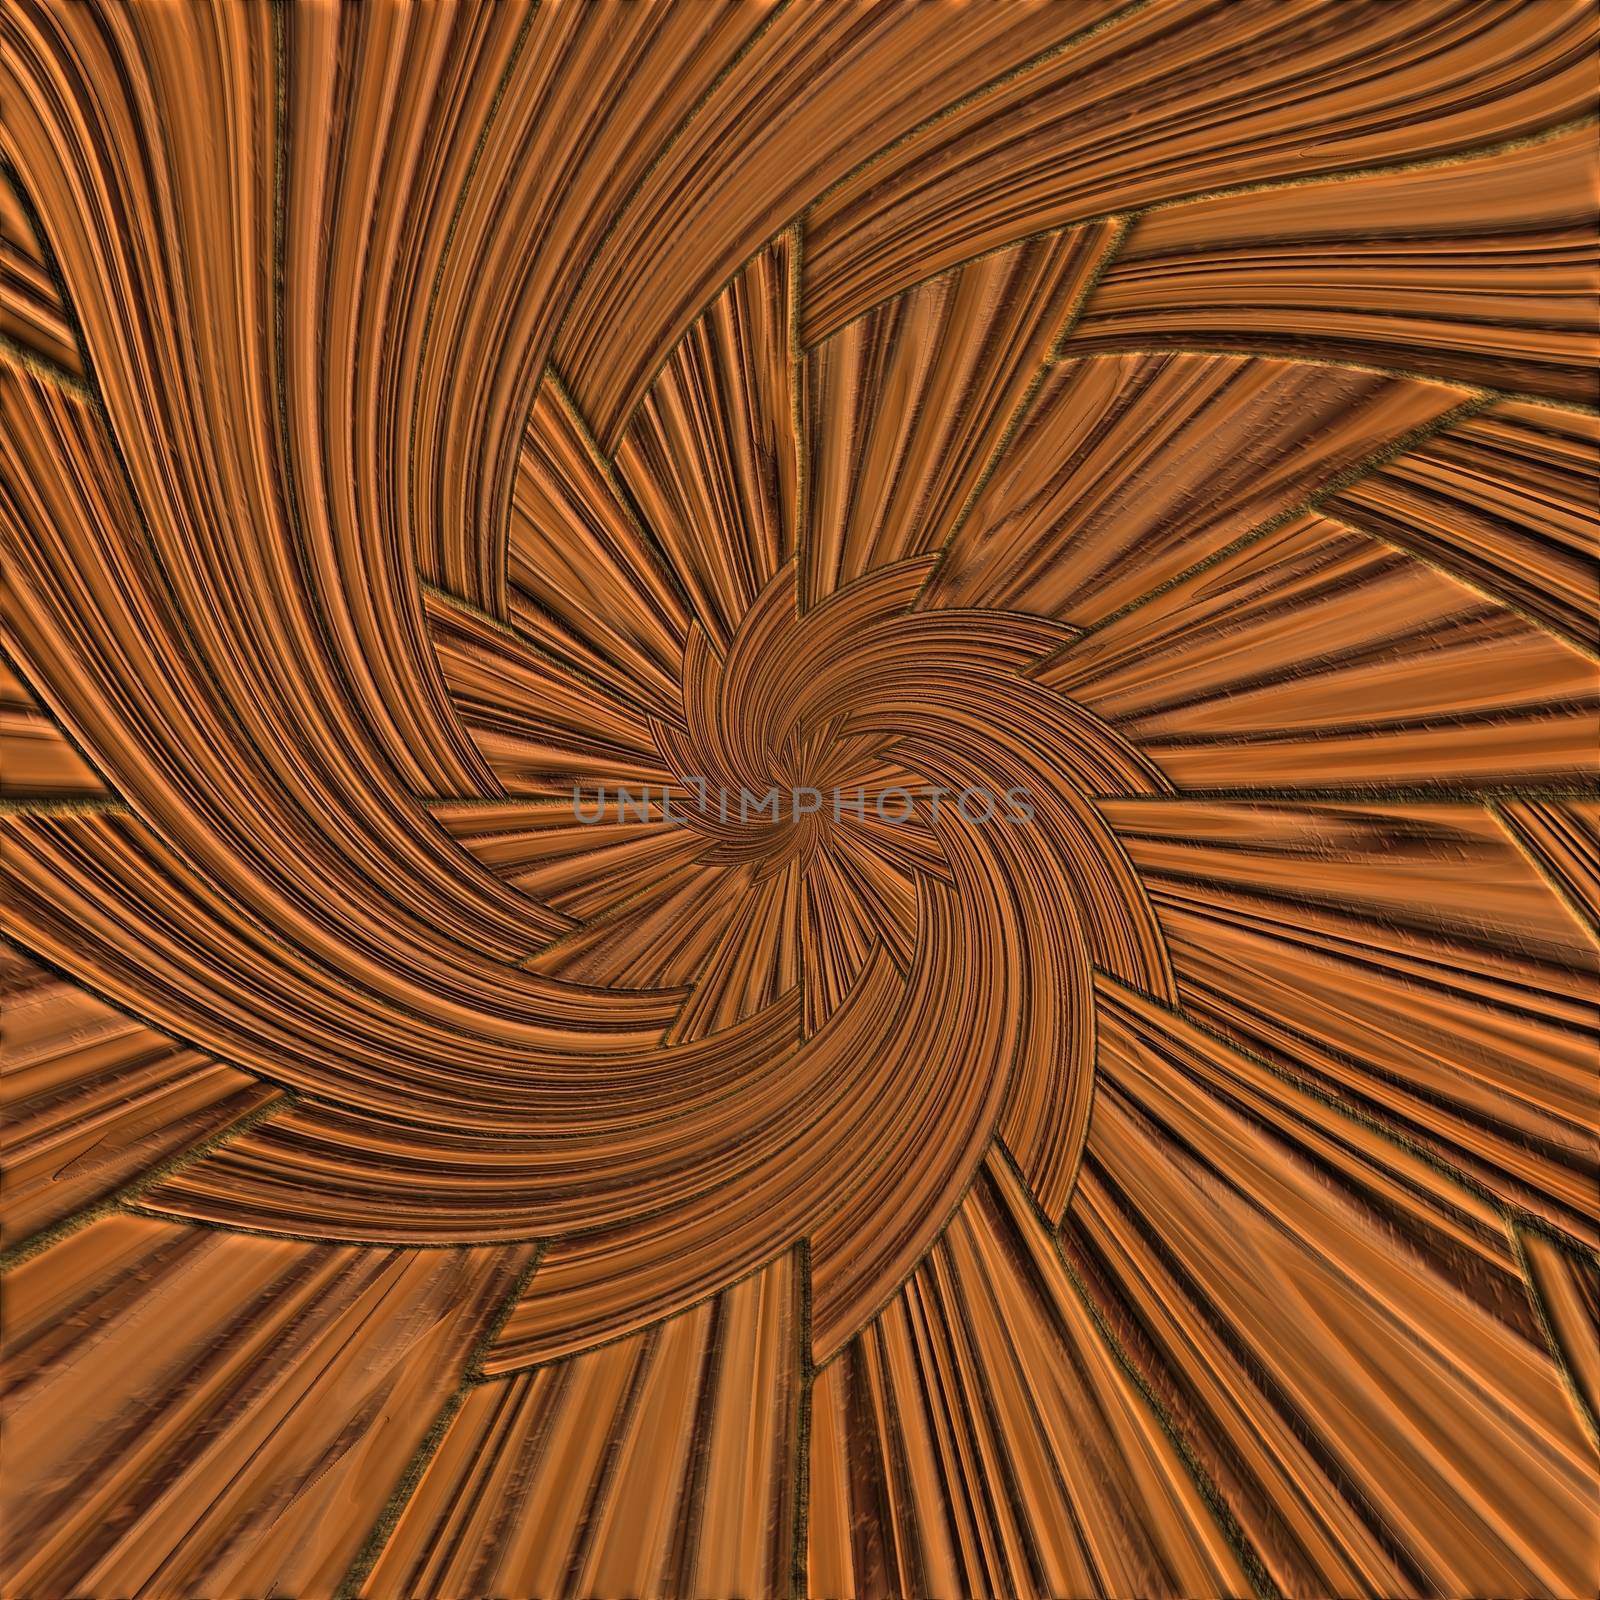 Background seamless tile with embossed mosaic pattern on polished wood